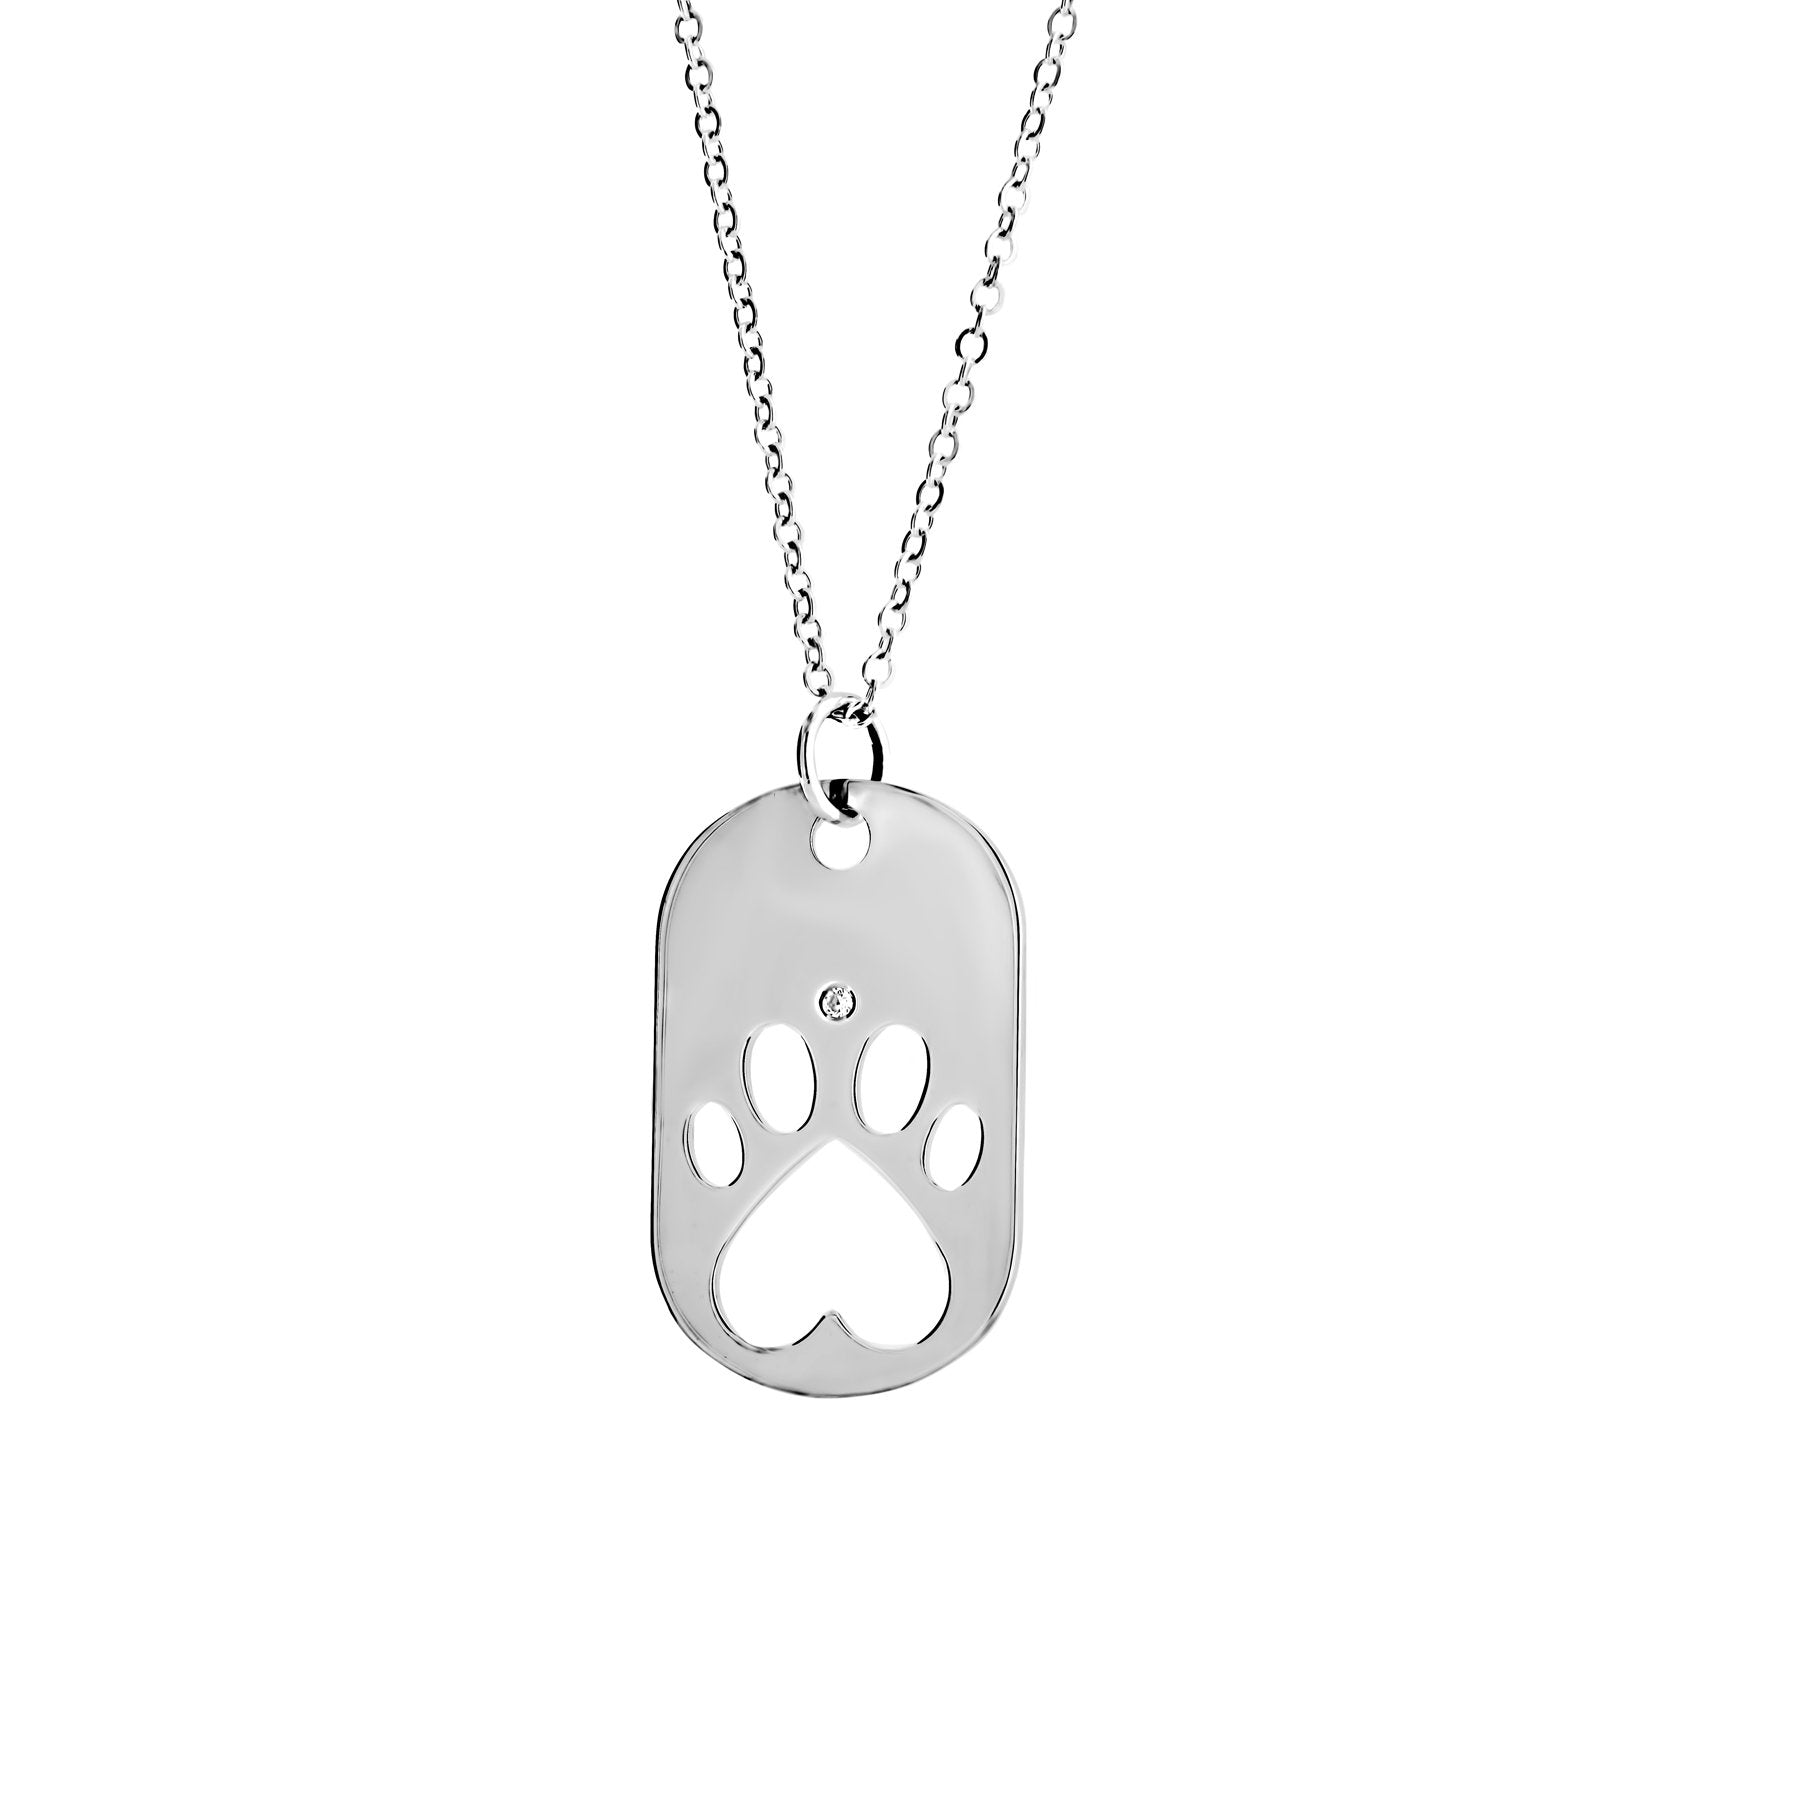 Our Cause for Paws Sterling Silver Dog Tag Necklace